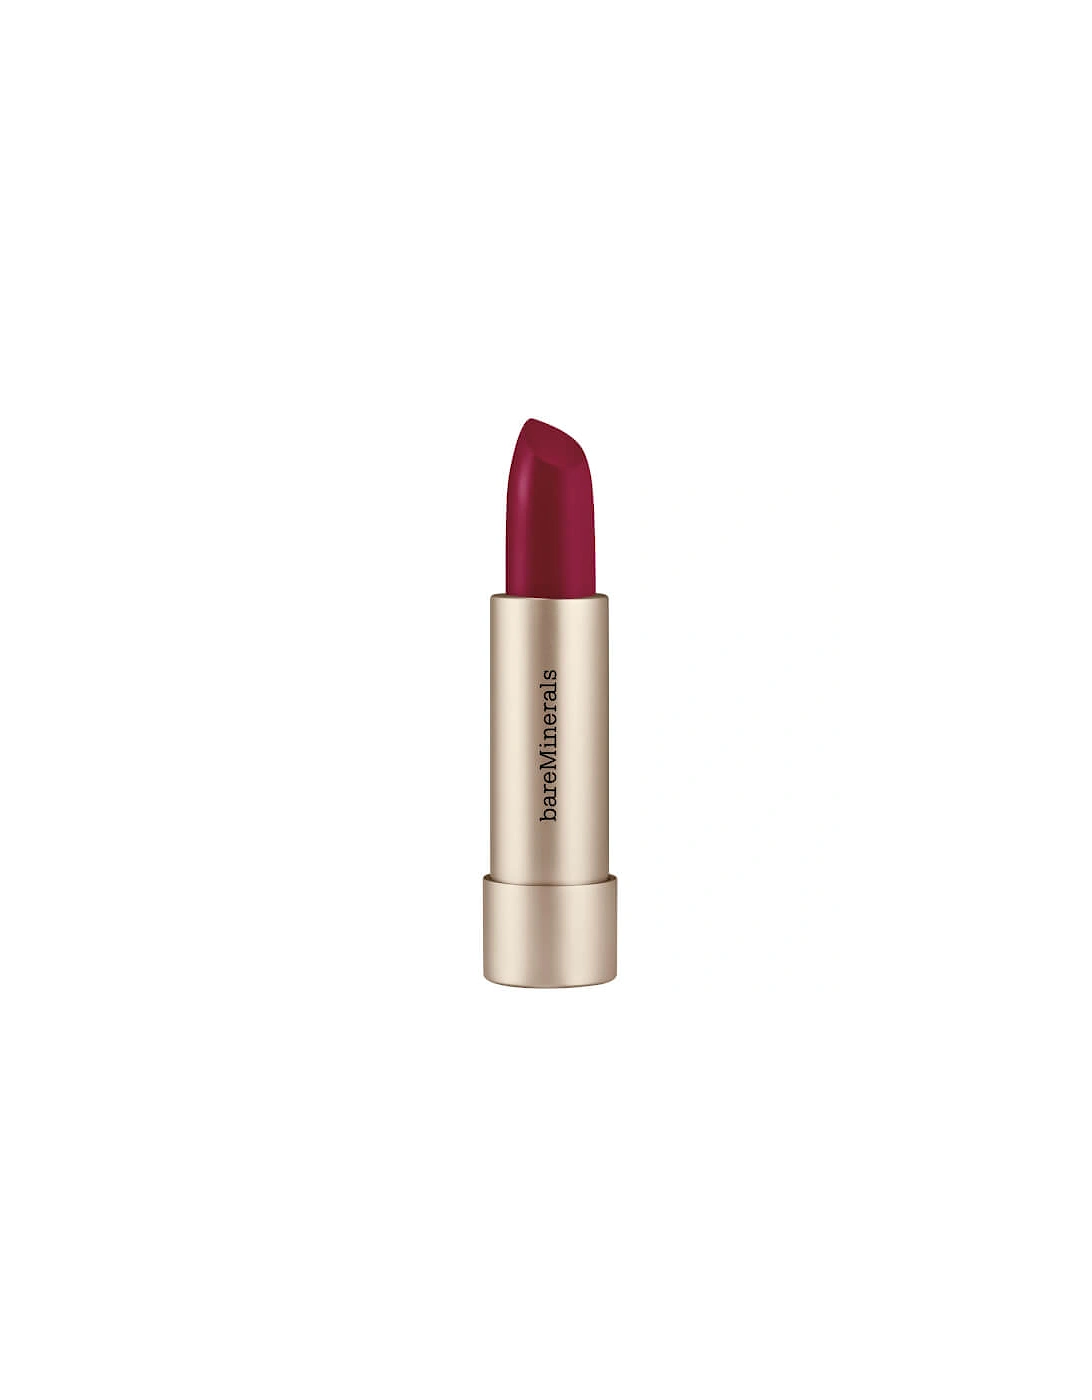 Mineralist Hydra Smoothing Lipstick - Fortitude, 2 of 1